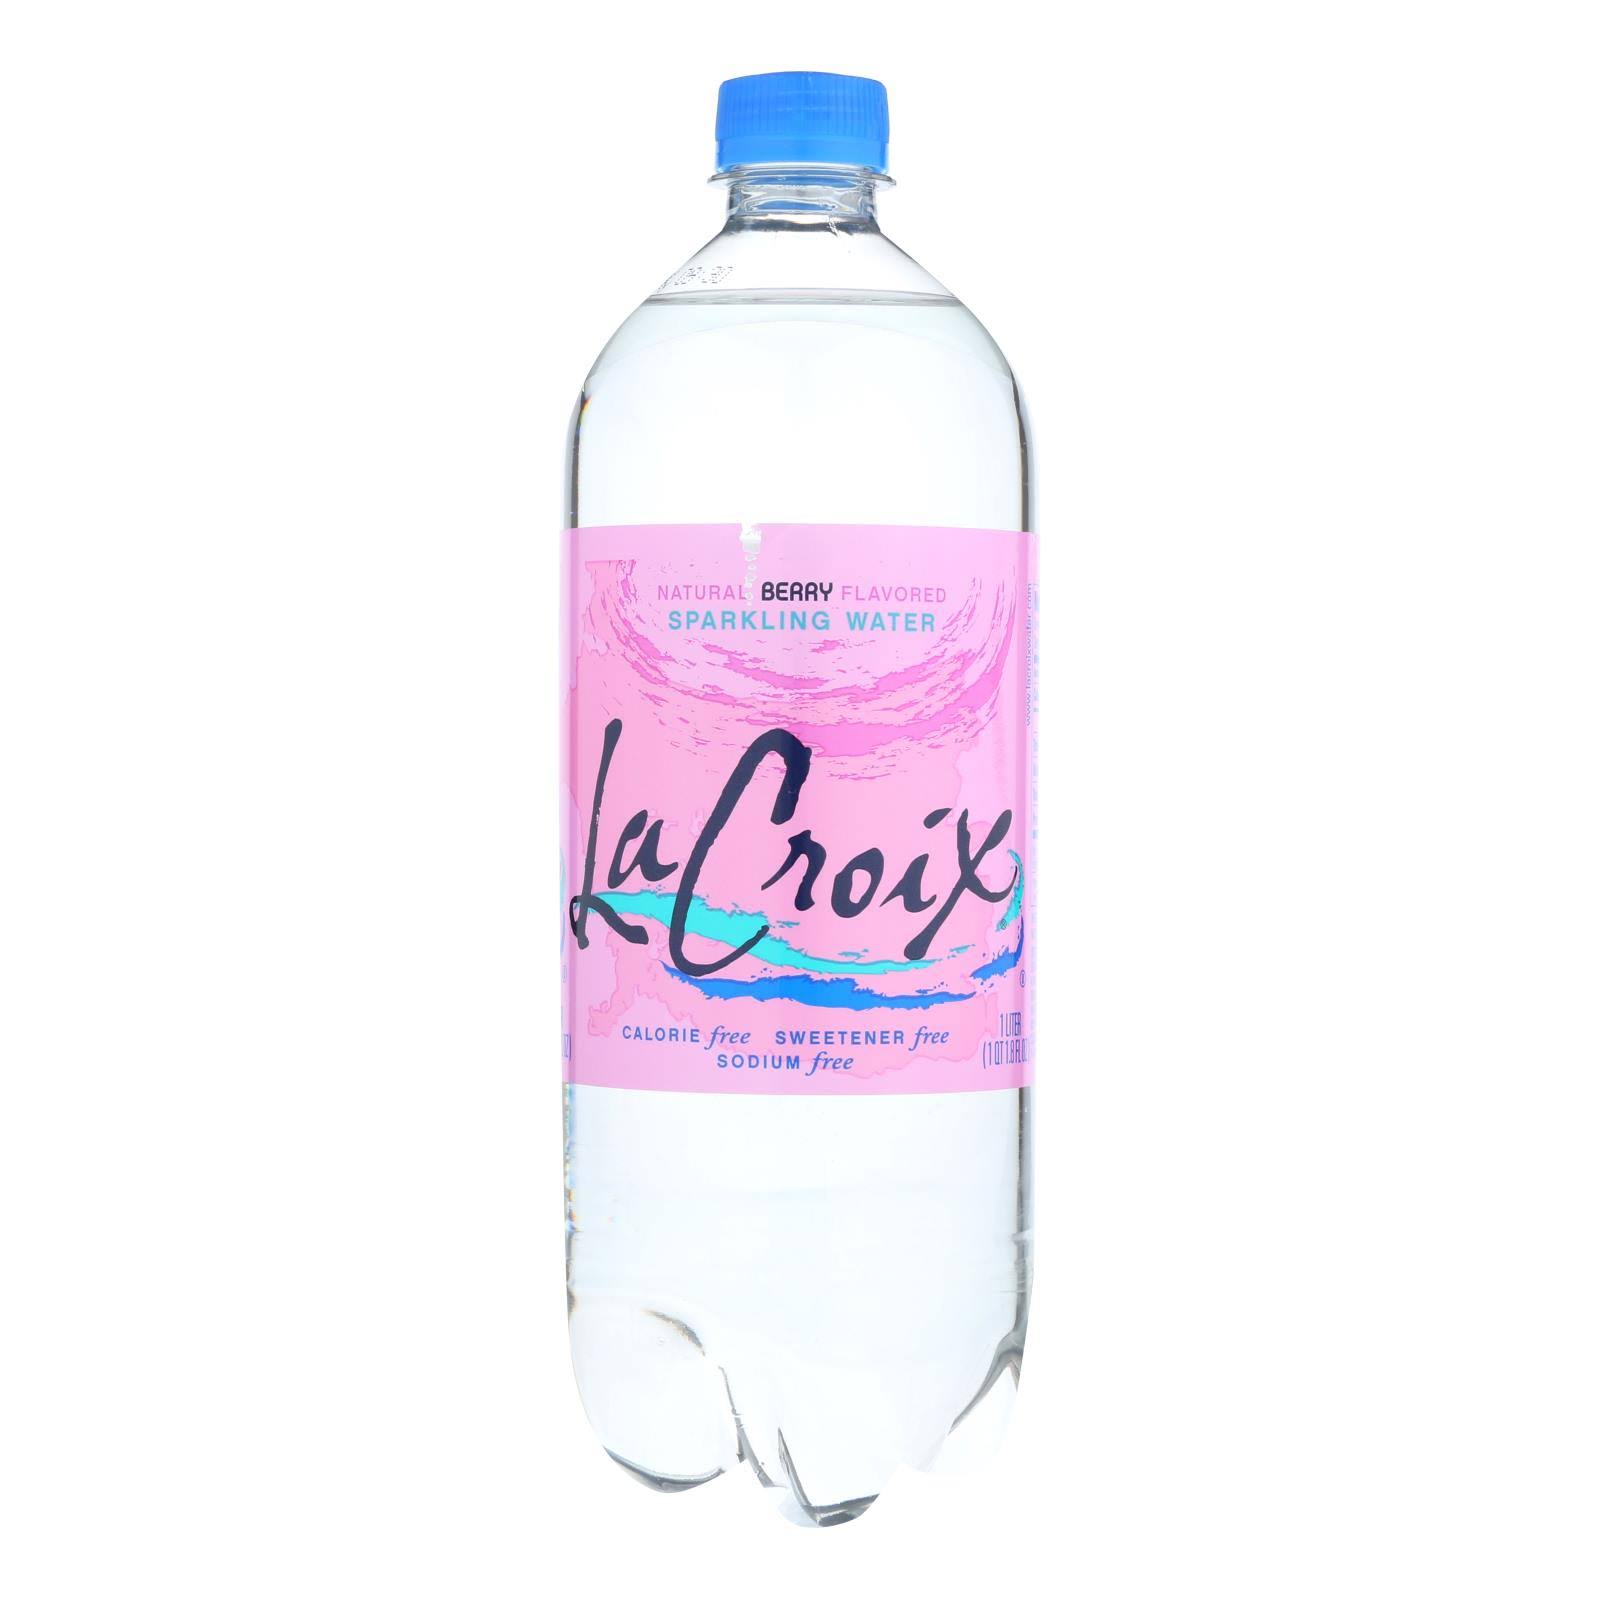 Lacroix - Sparkling Water - Berry - Case of 15 - 1 Liter